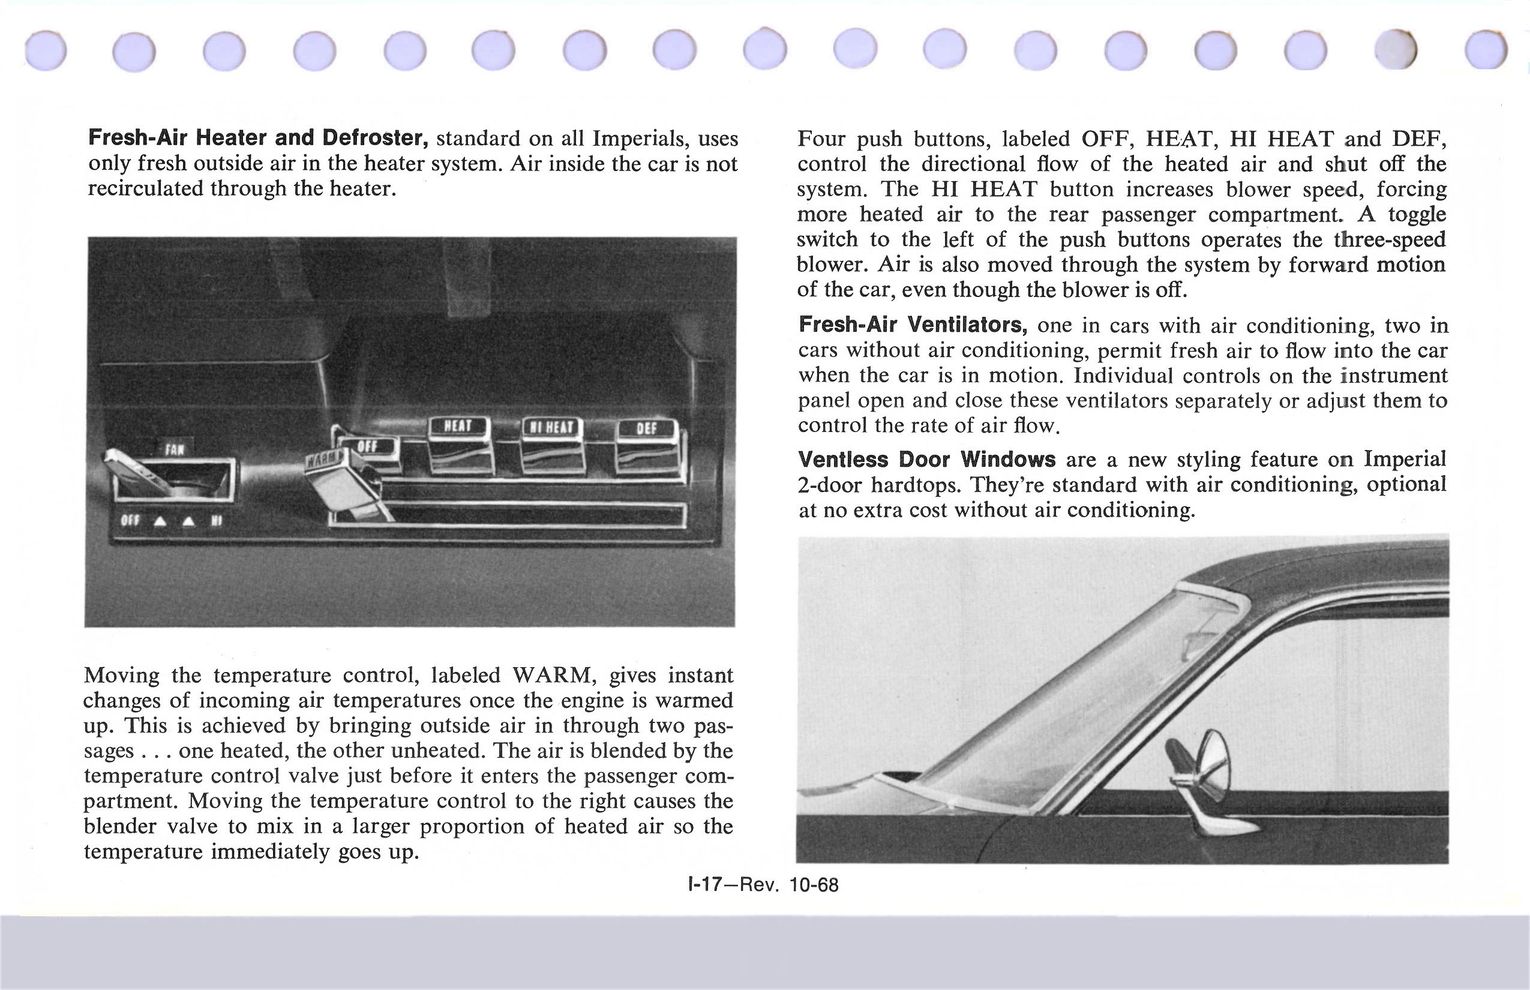 1969 Chrysler Data Book Page 79